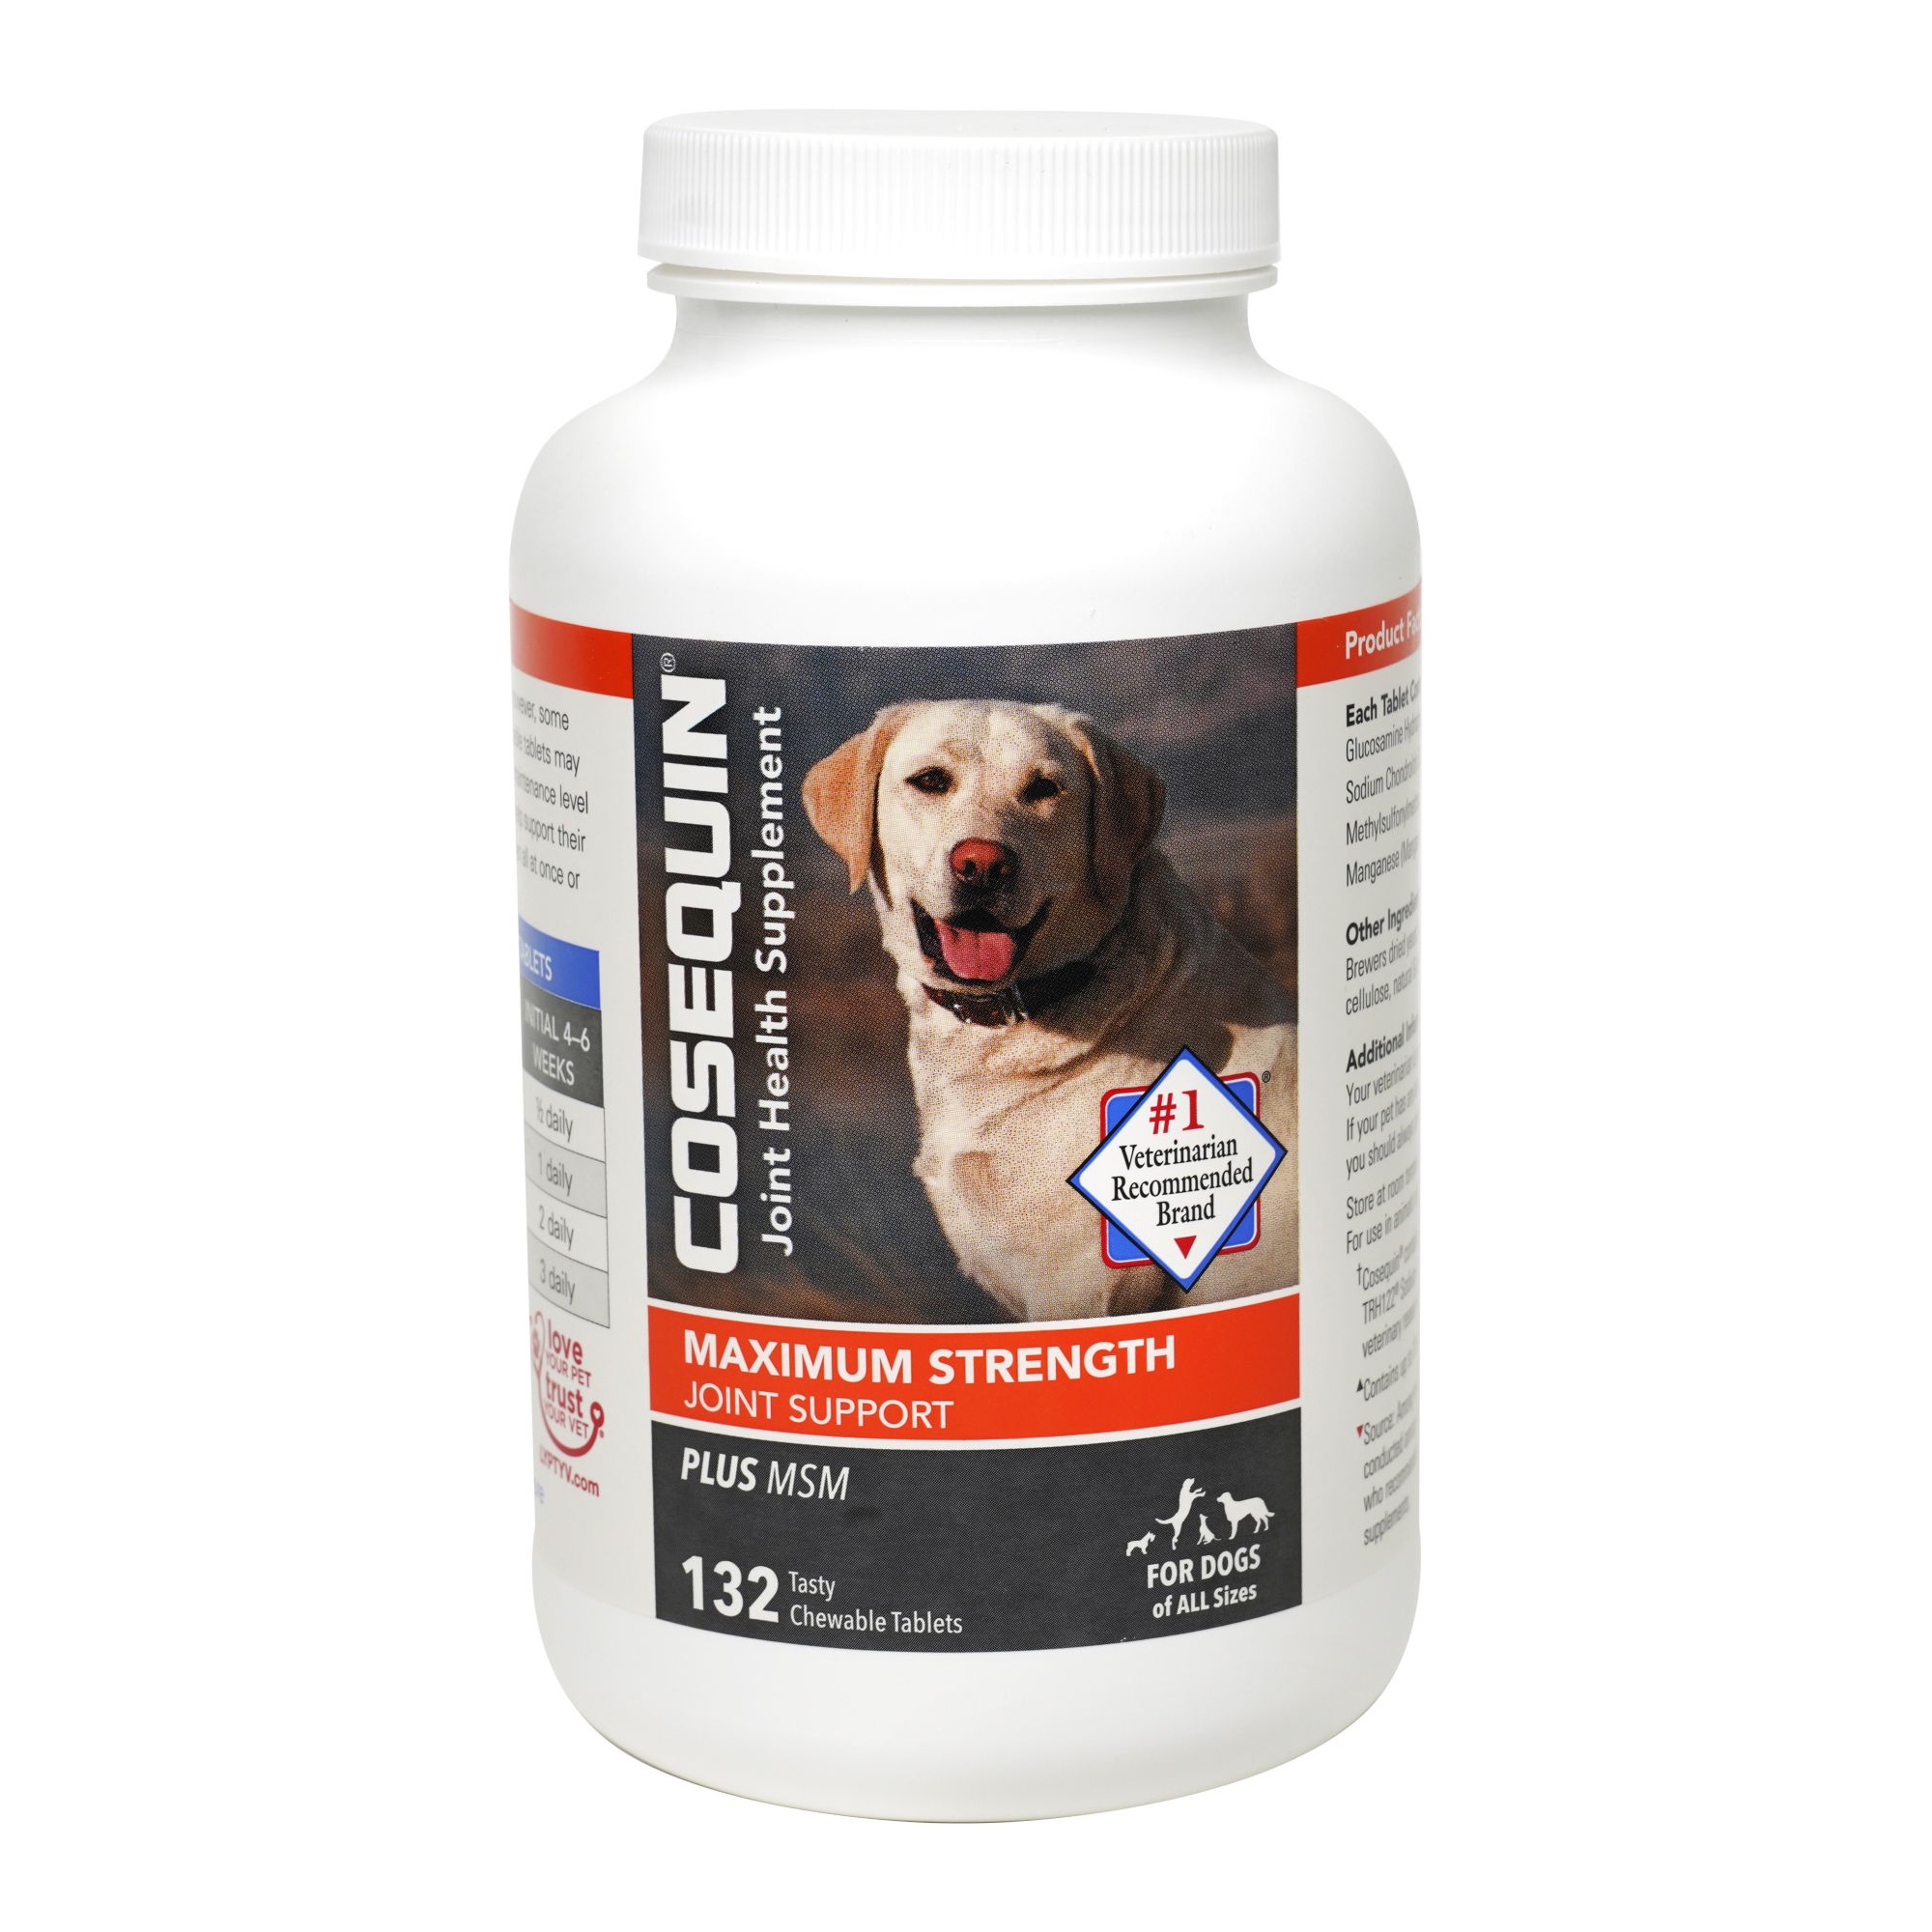 Cosequin Plus MSM Joint Health Supplement for Dogs, 132 ct.